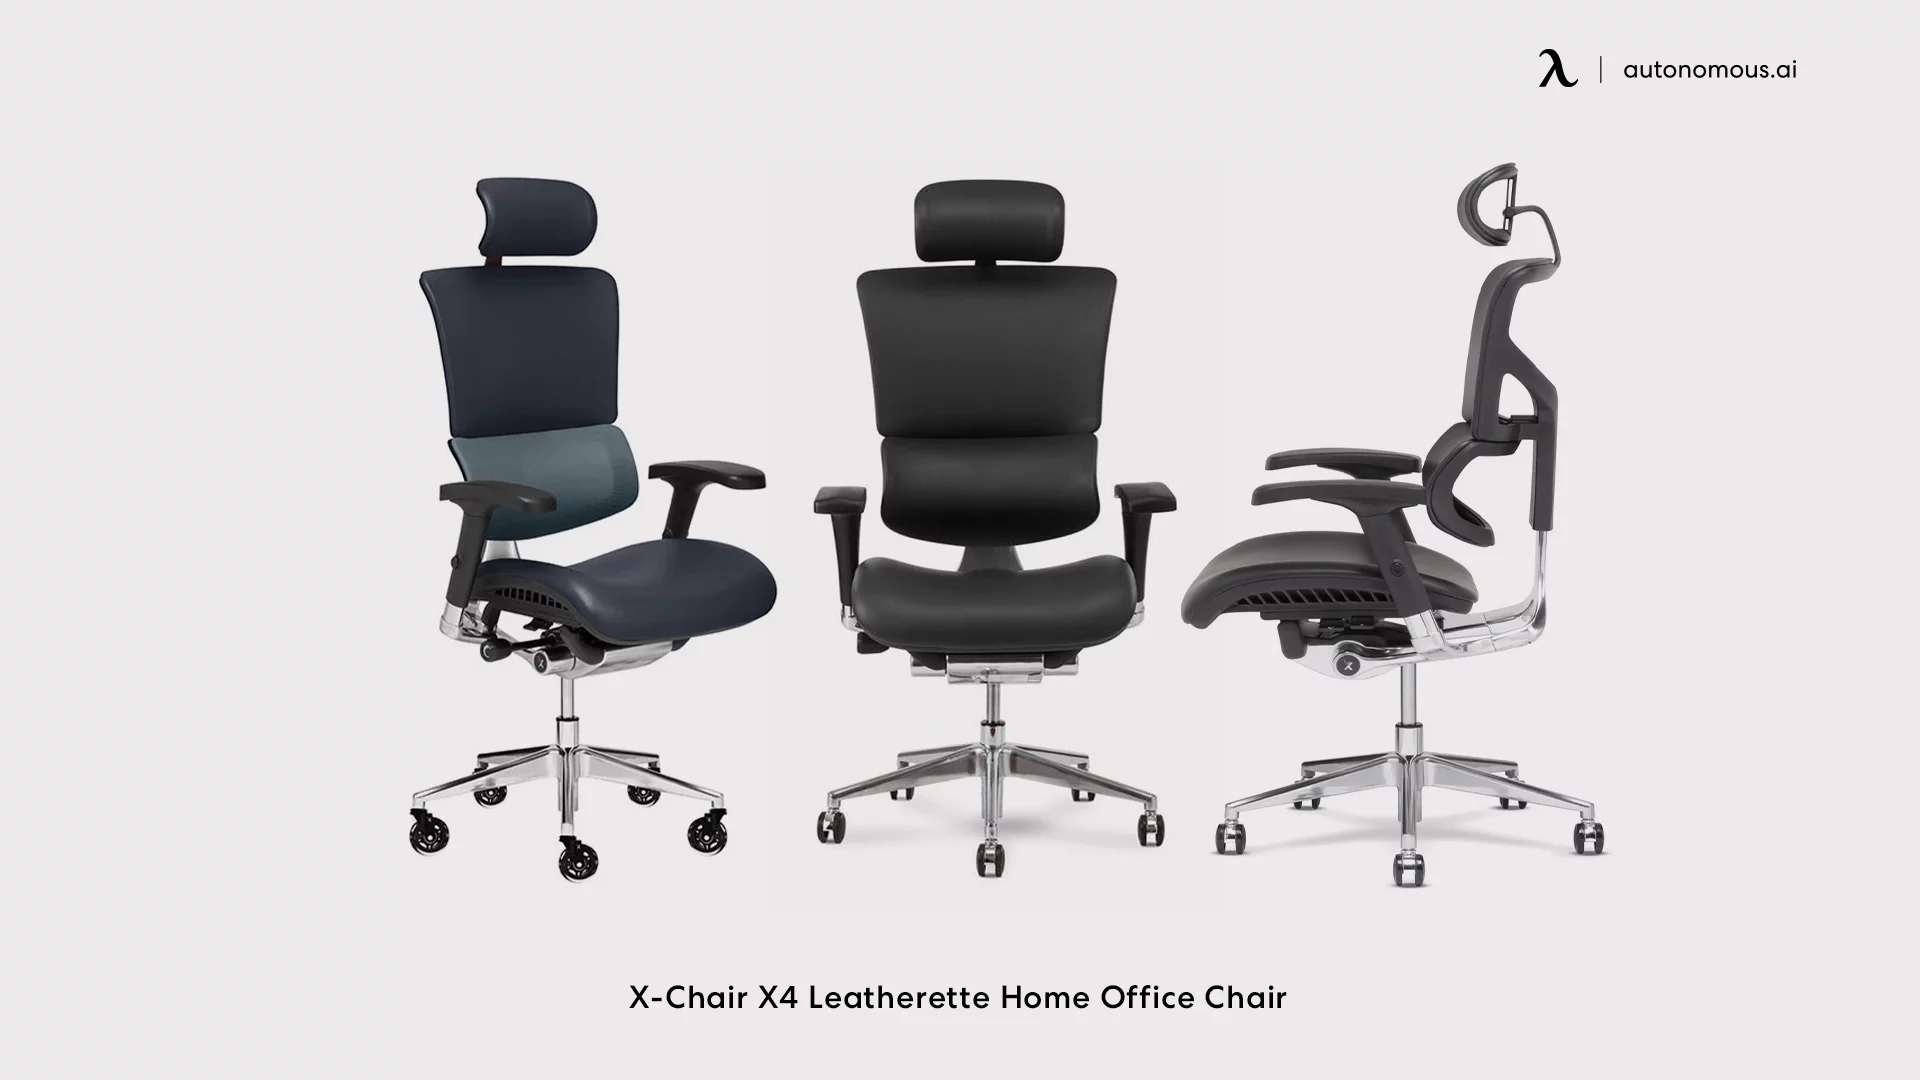 X-Chair X4 Memory Foam Leatherette Home Office Chair